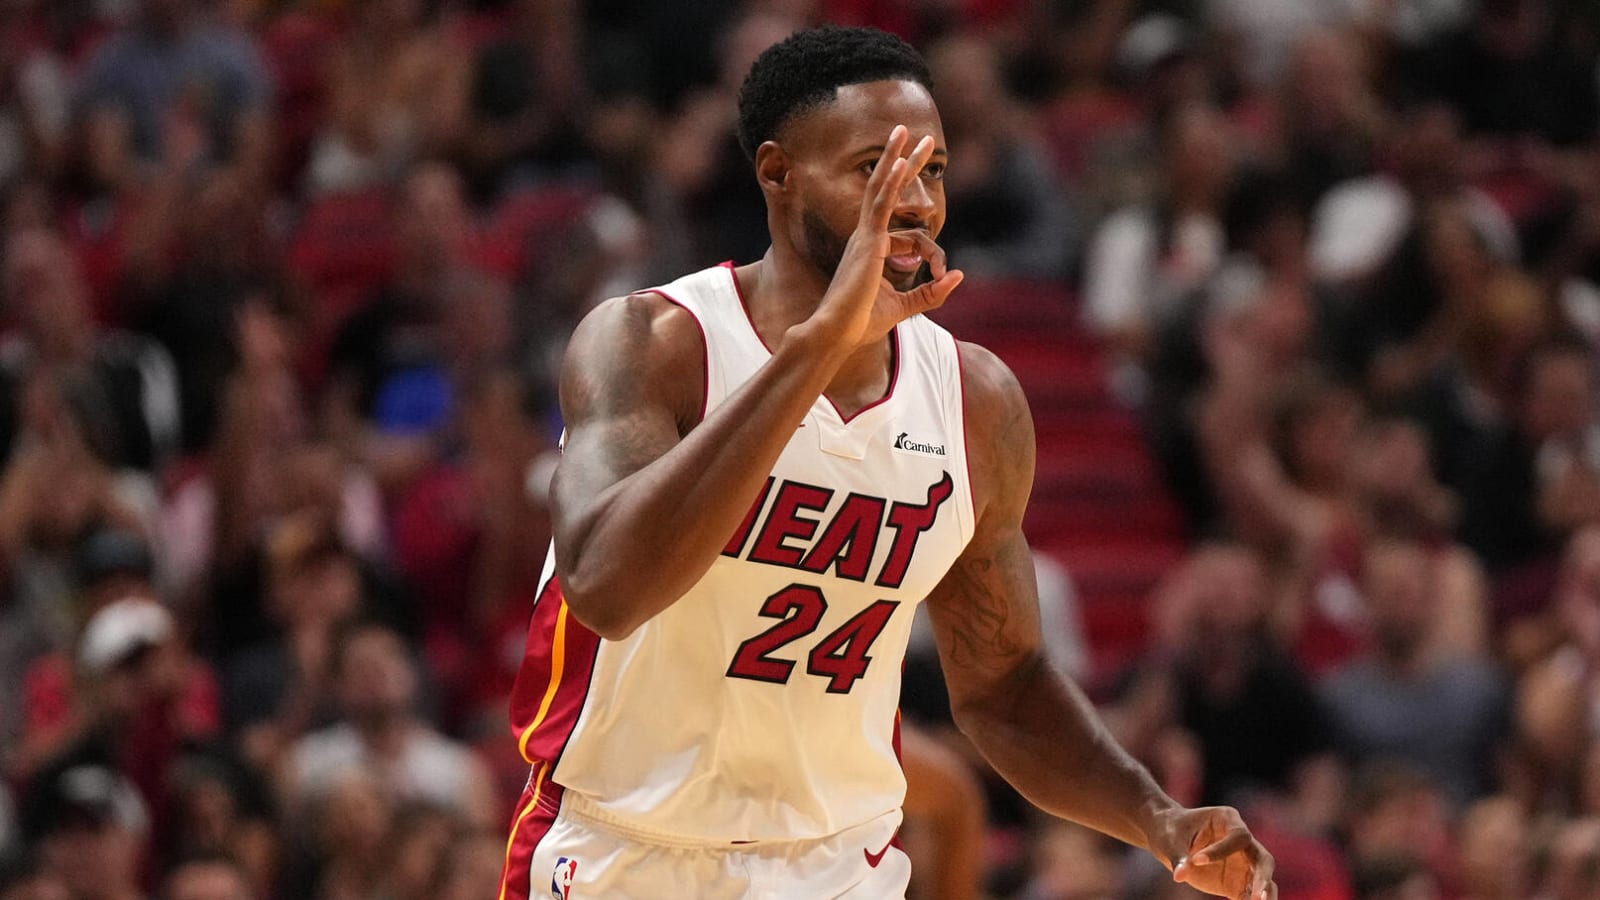 Heat forward ruled out following car accident